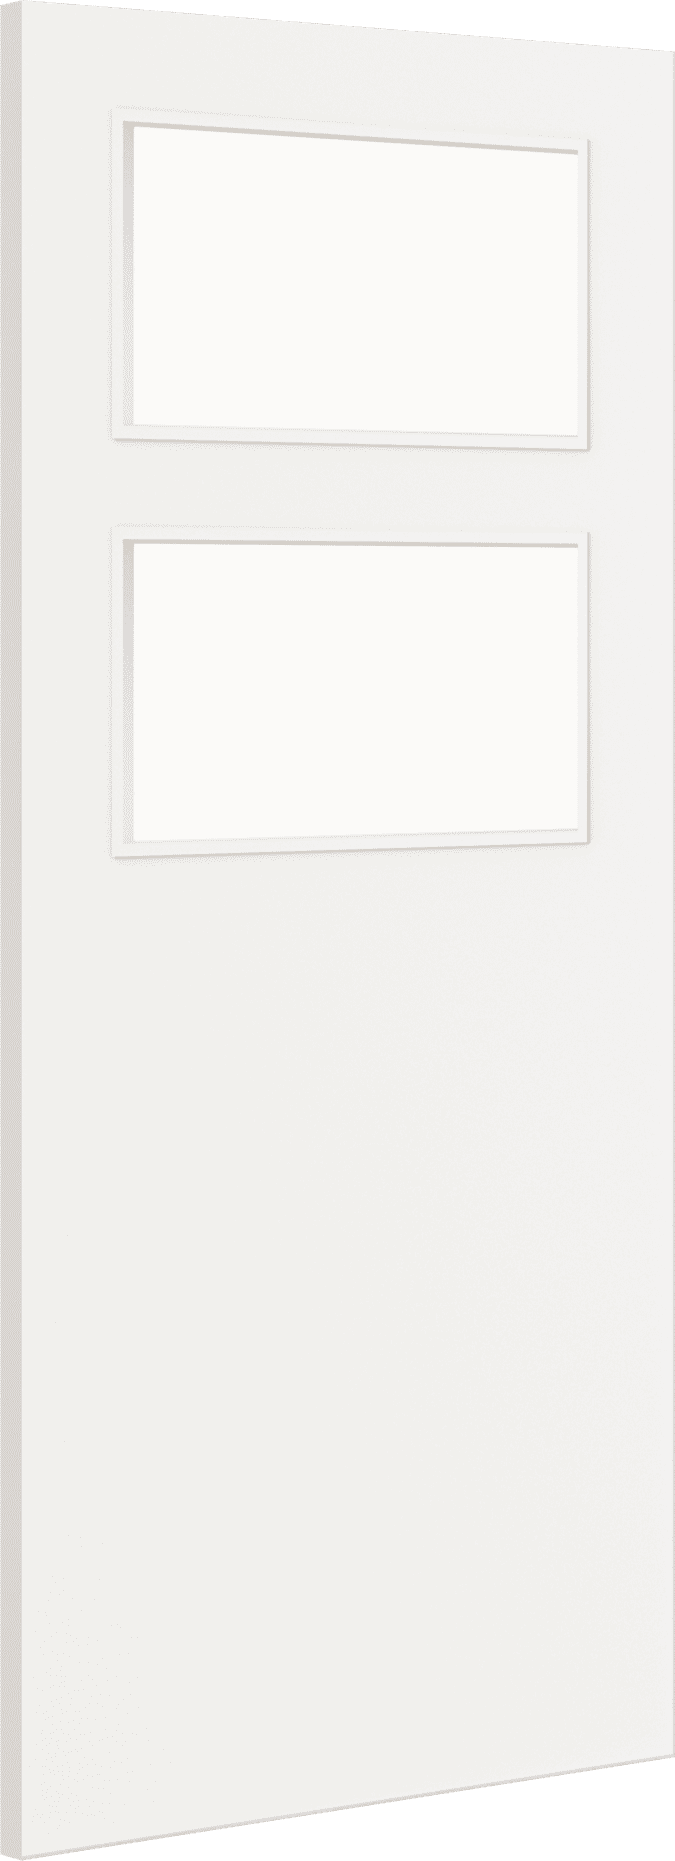 1981mm x 533mm x 44mm (21") Architectural Paint Grade White 02 Frosted Glazed Fire Door Blank